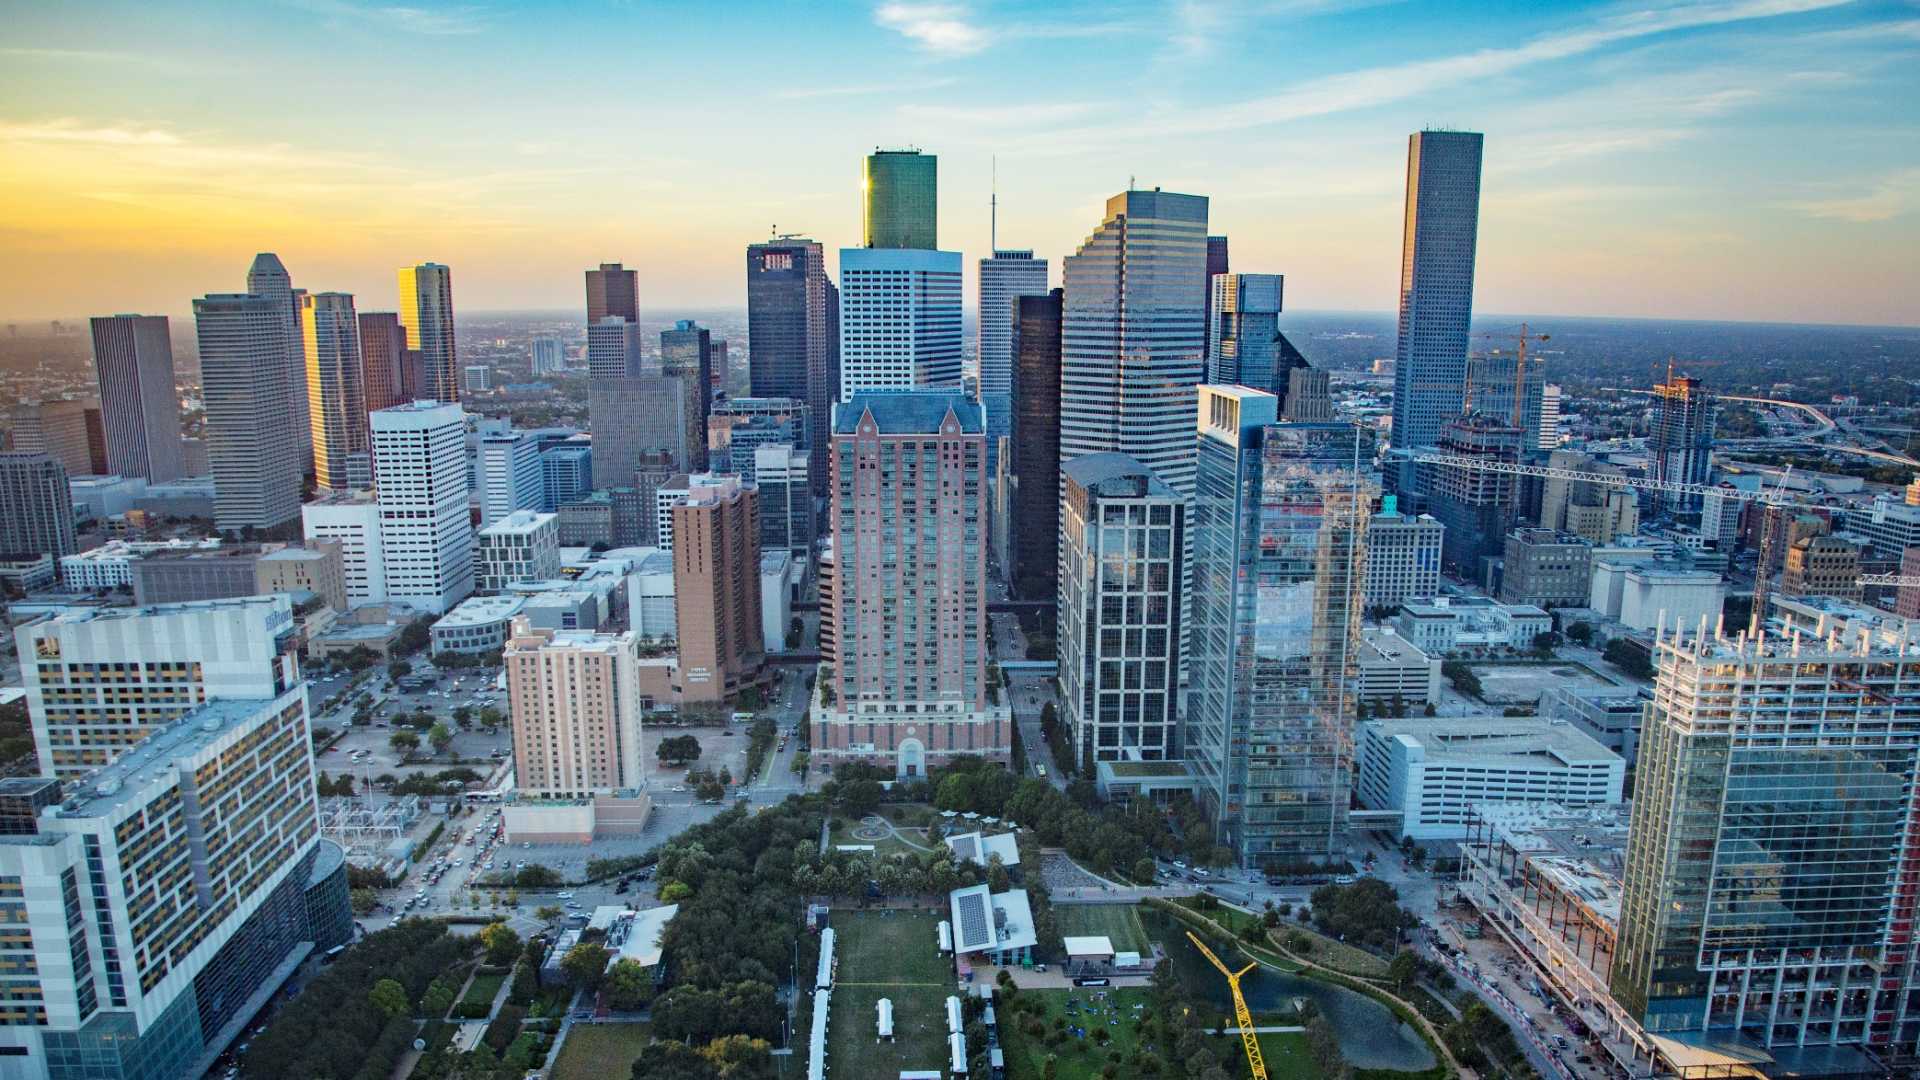 What's New in Houston Projects, Expansions & News